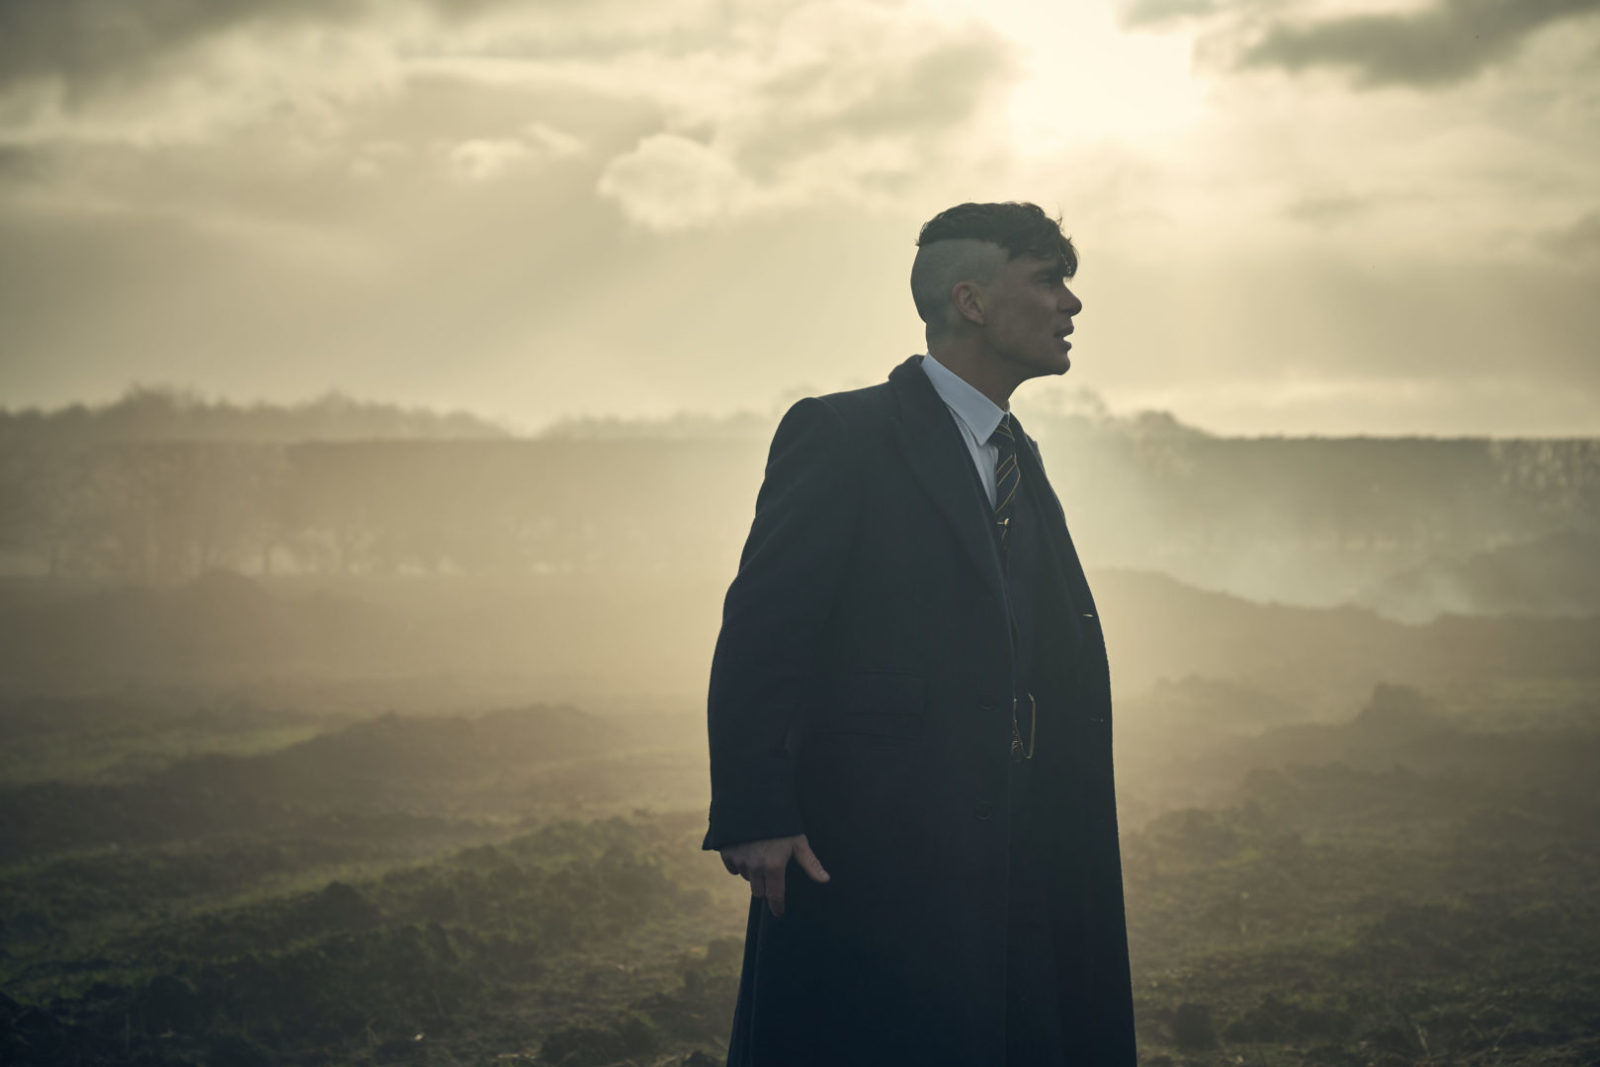 Peaky Blinders Season 6: Release Date, Cast, Plot, And Everything We Know So Far